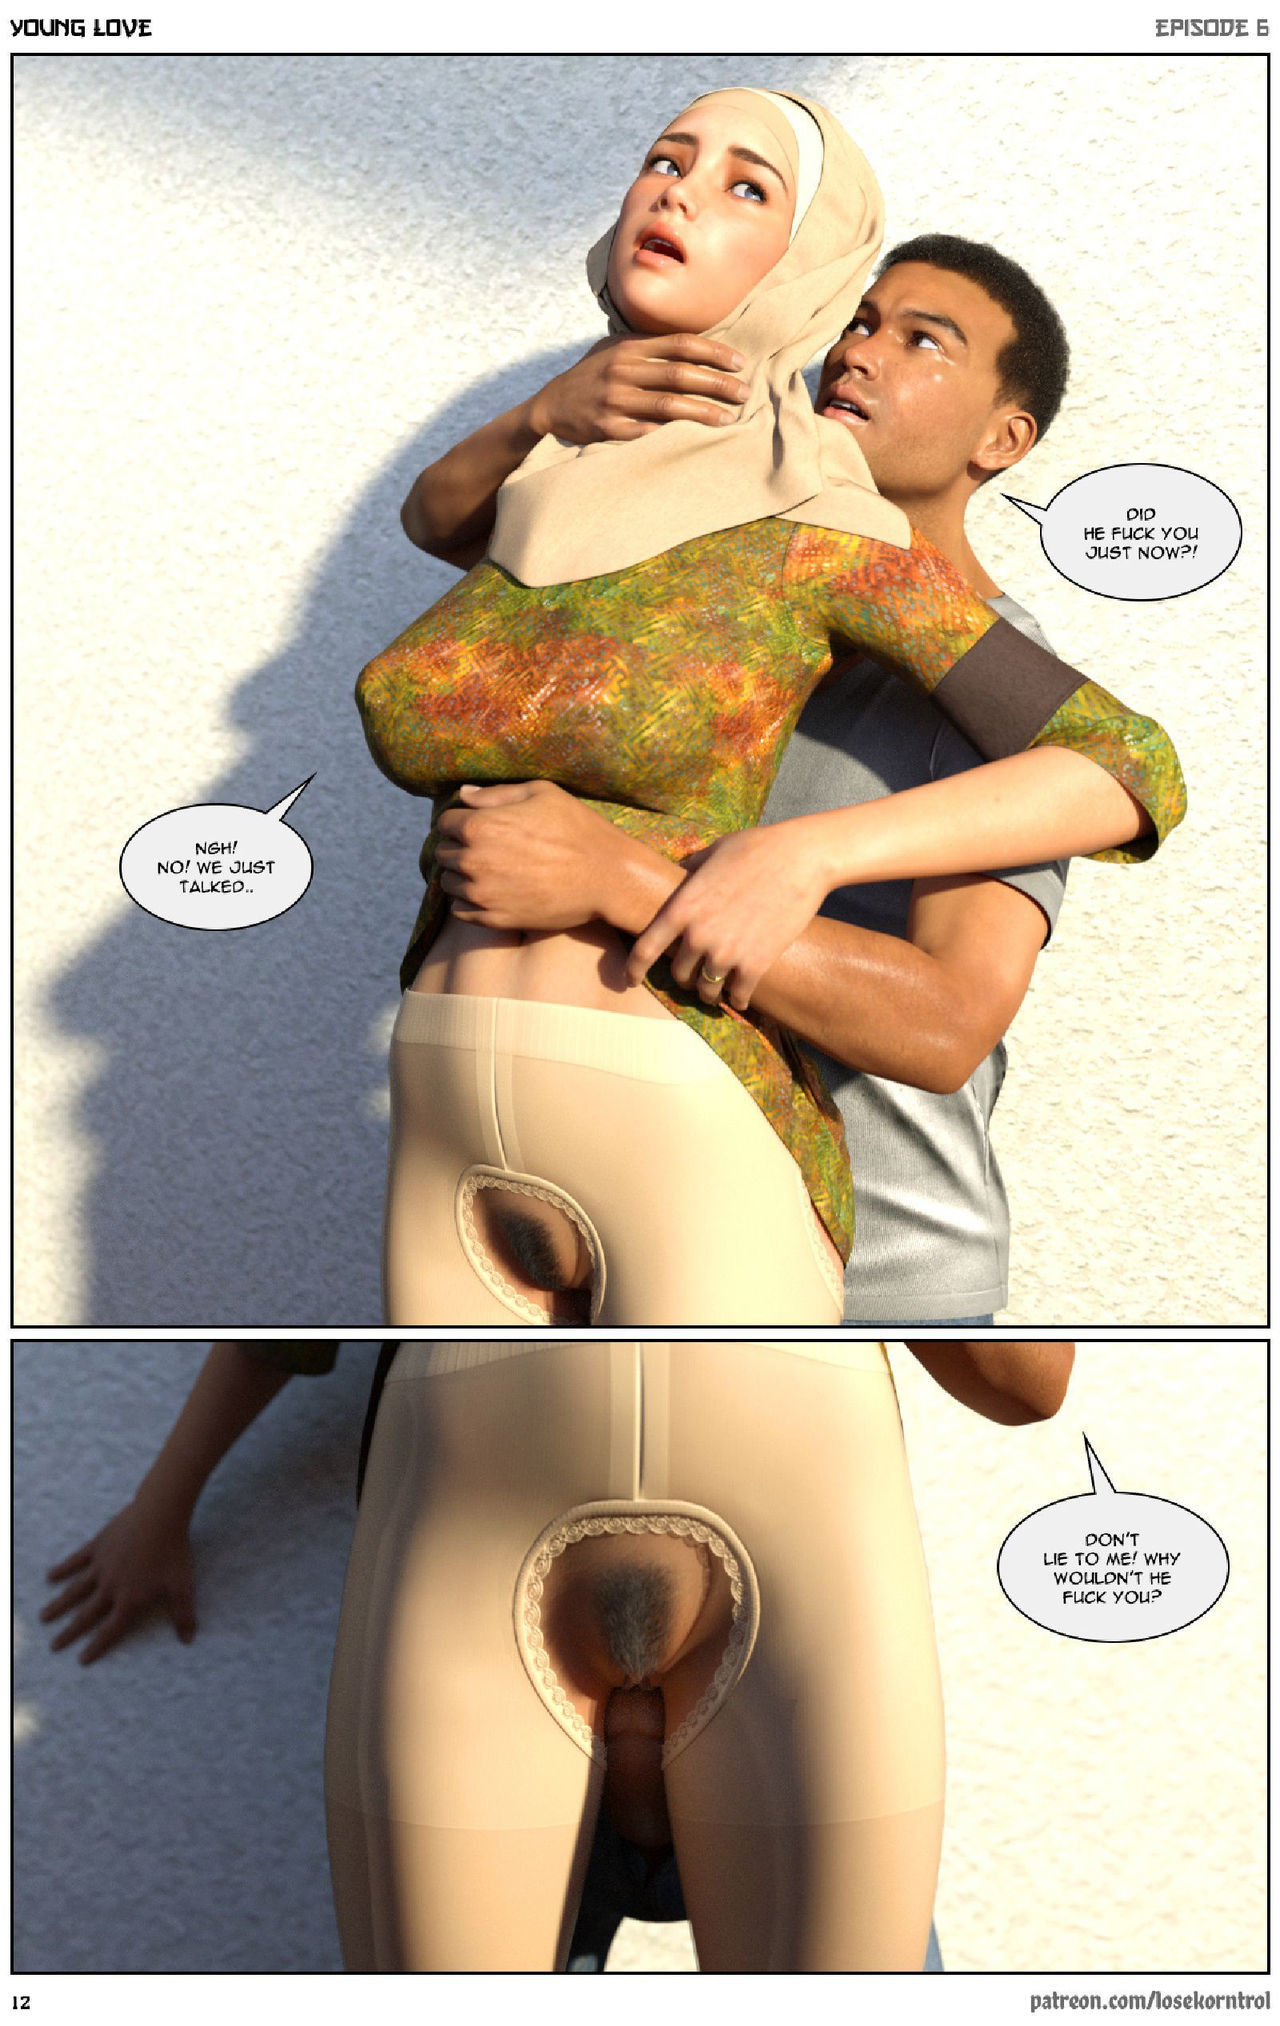 Young Love 6 - Losekorntrol page 12